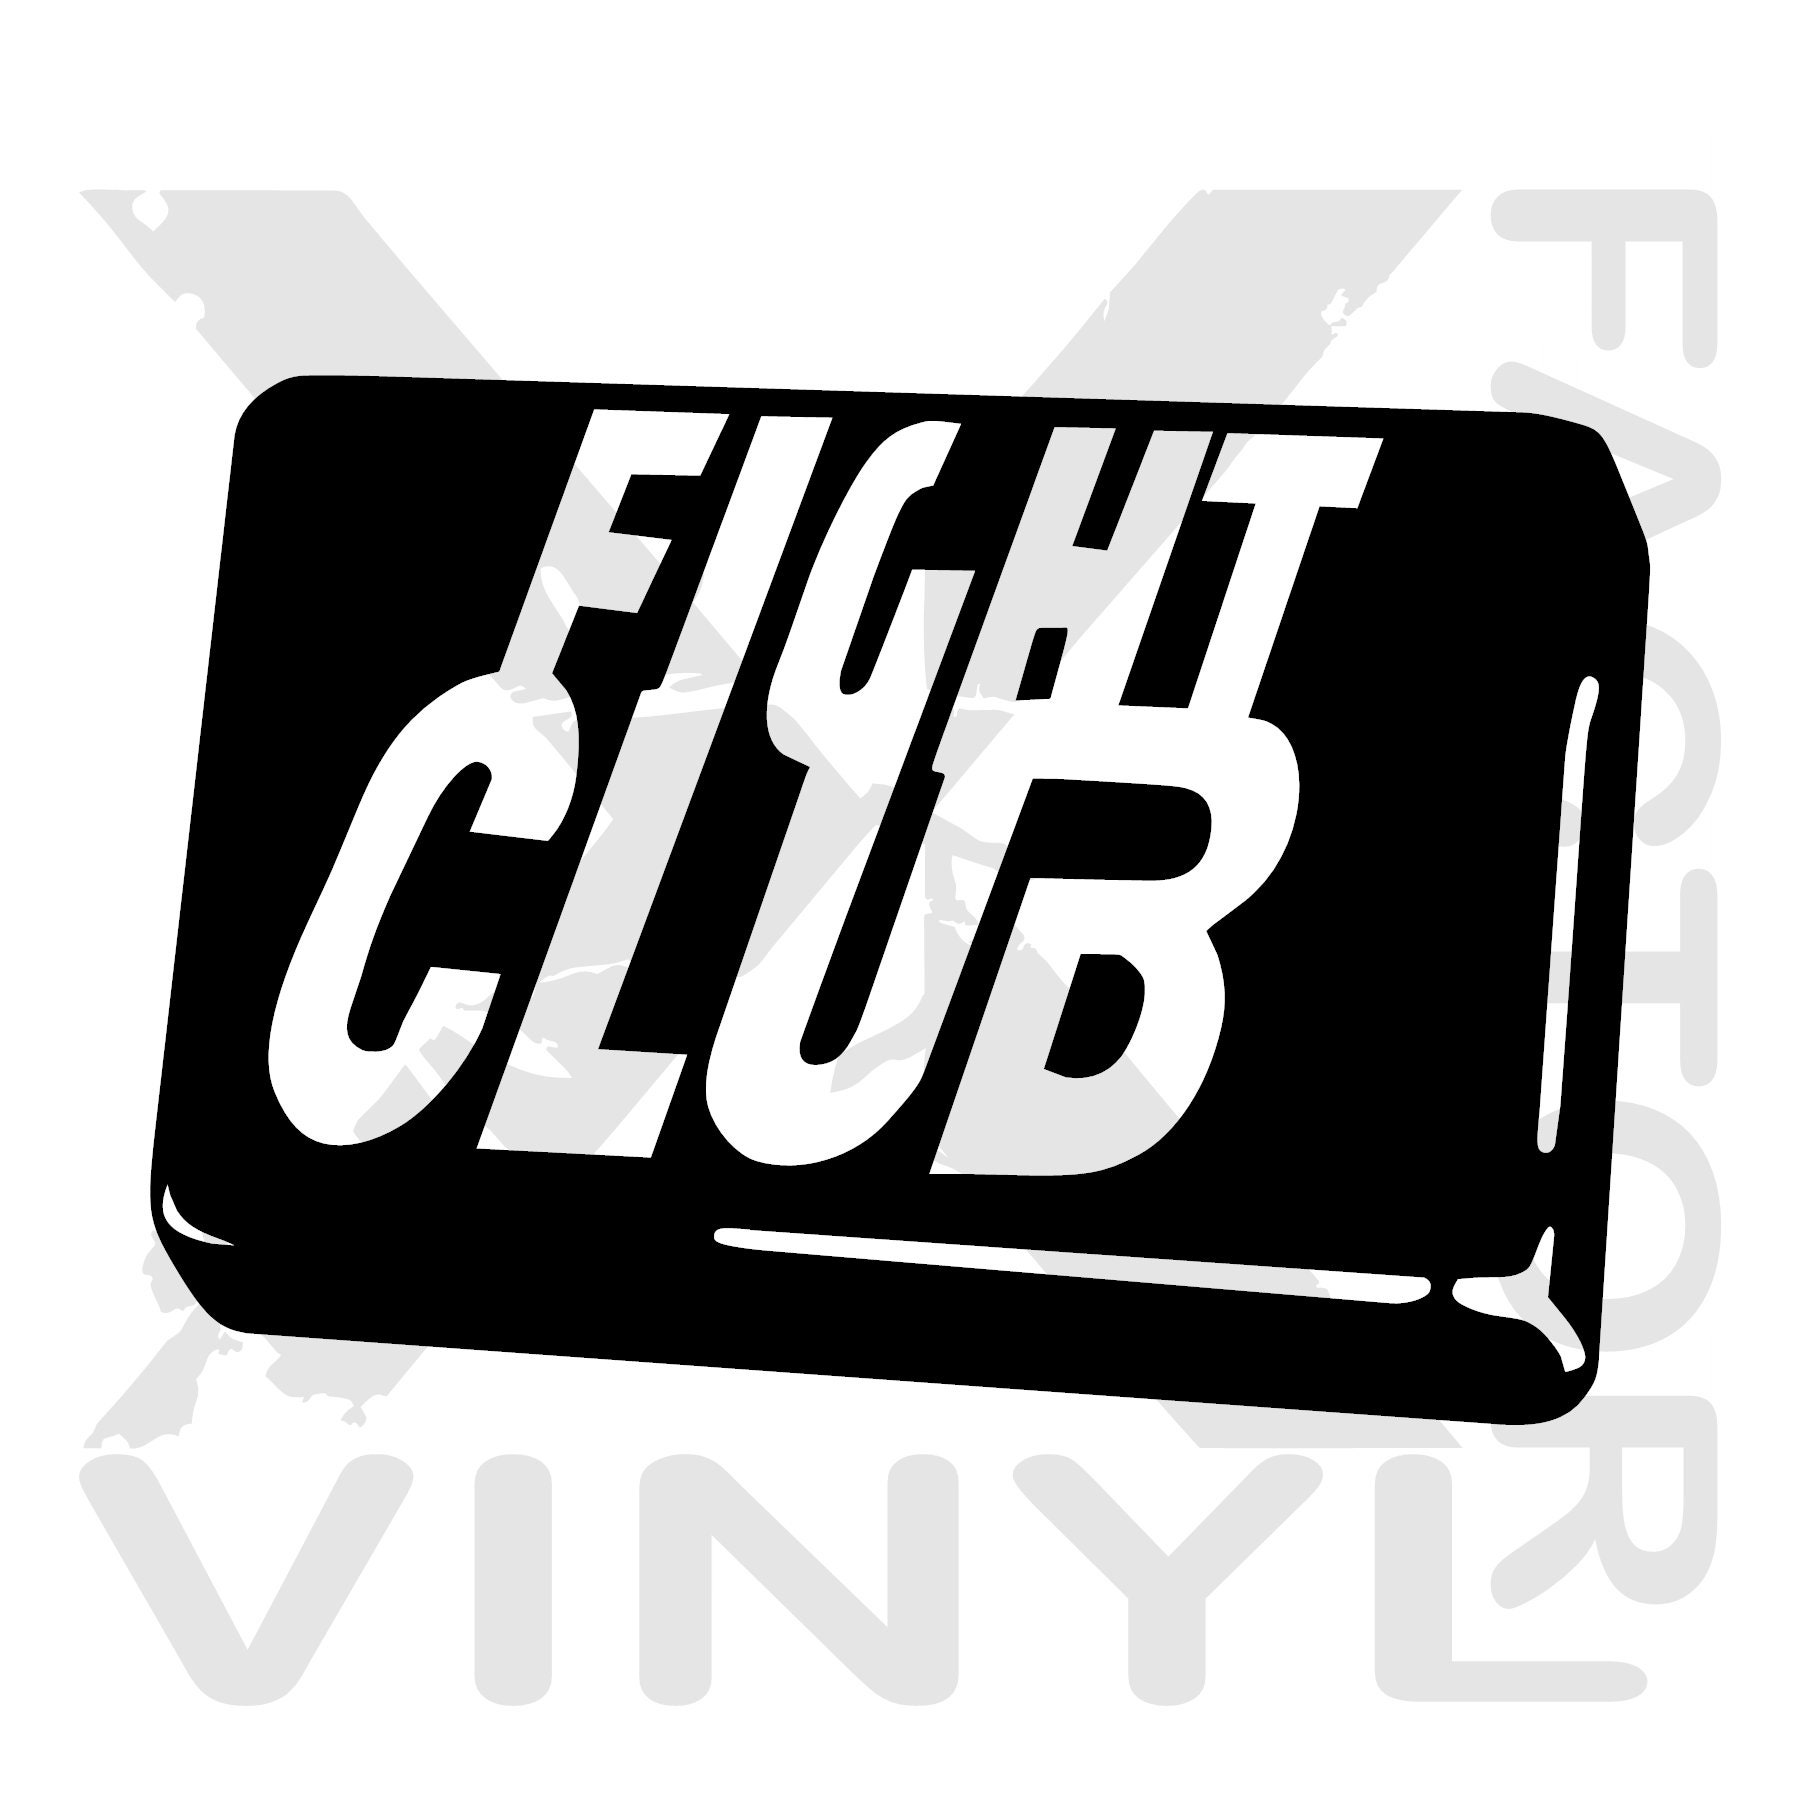 Fight Club Dicut Vinyl Decal Soap 14 Colors Available With - Etsy Canada